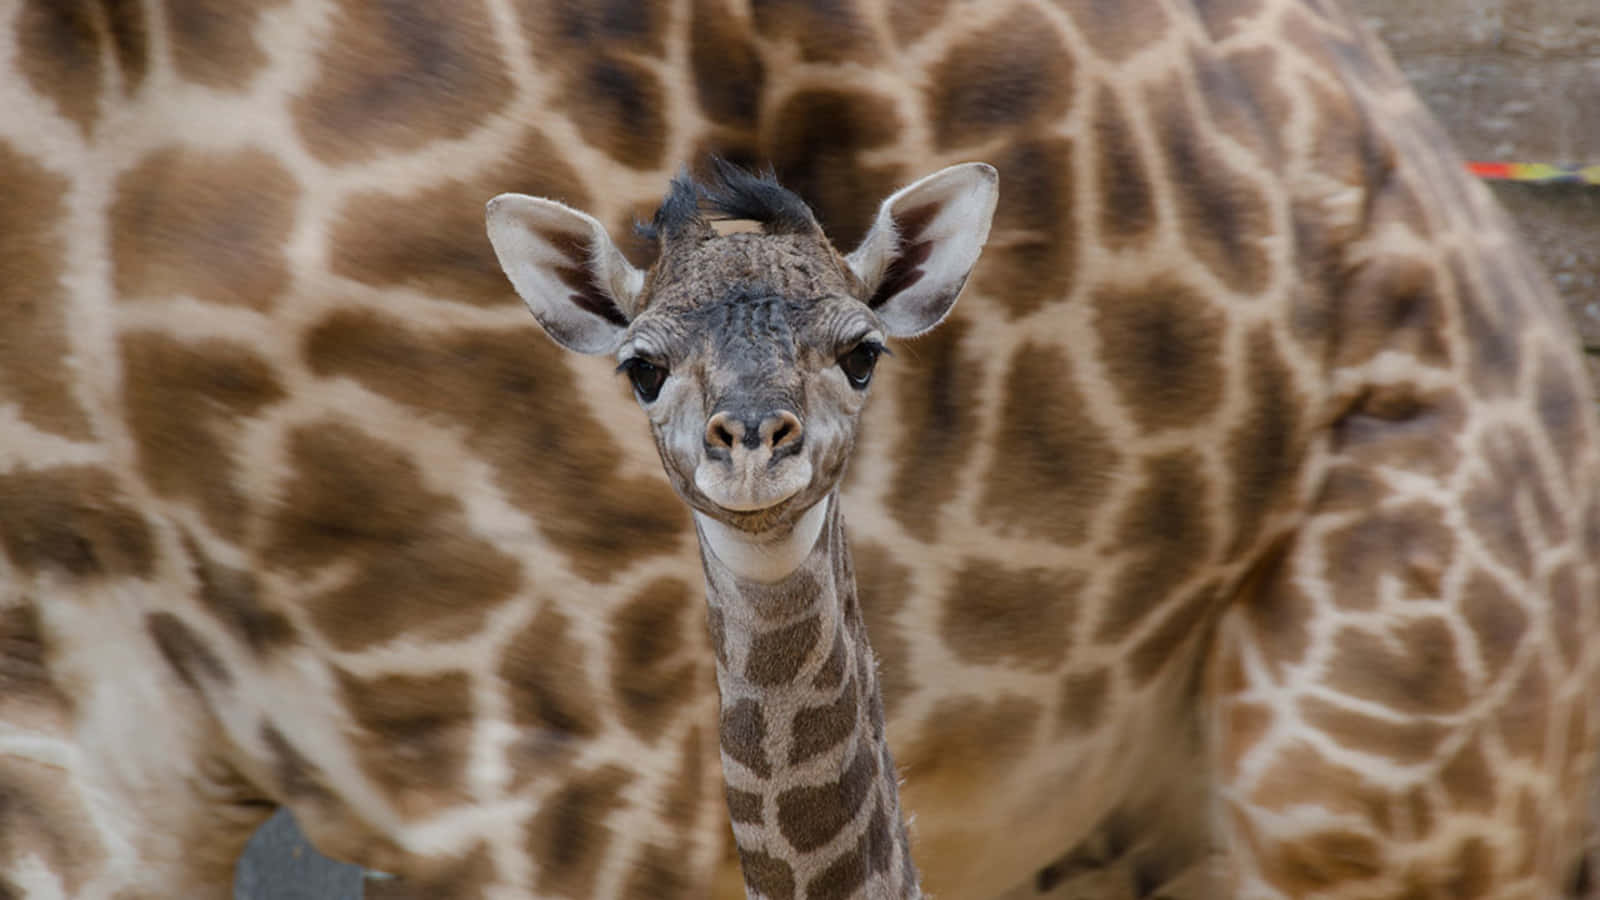 A curious baby giraffe stares intently